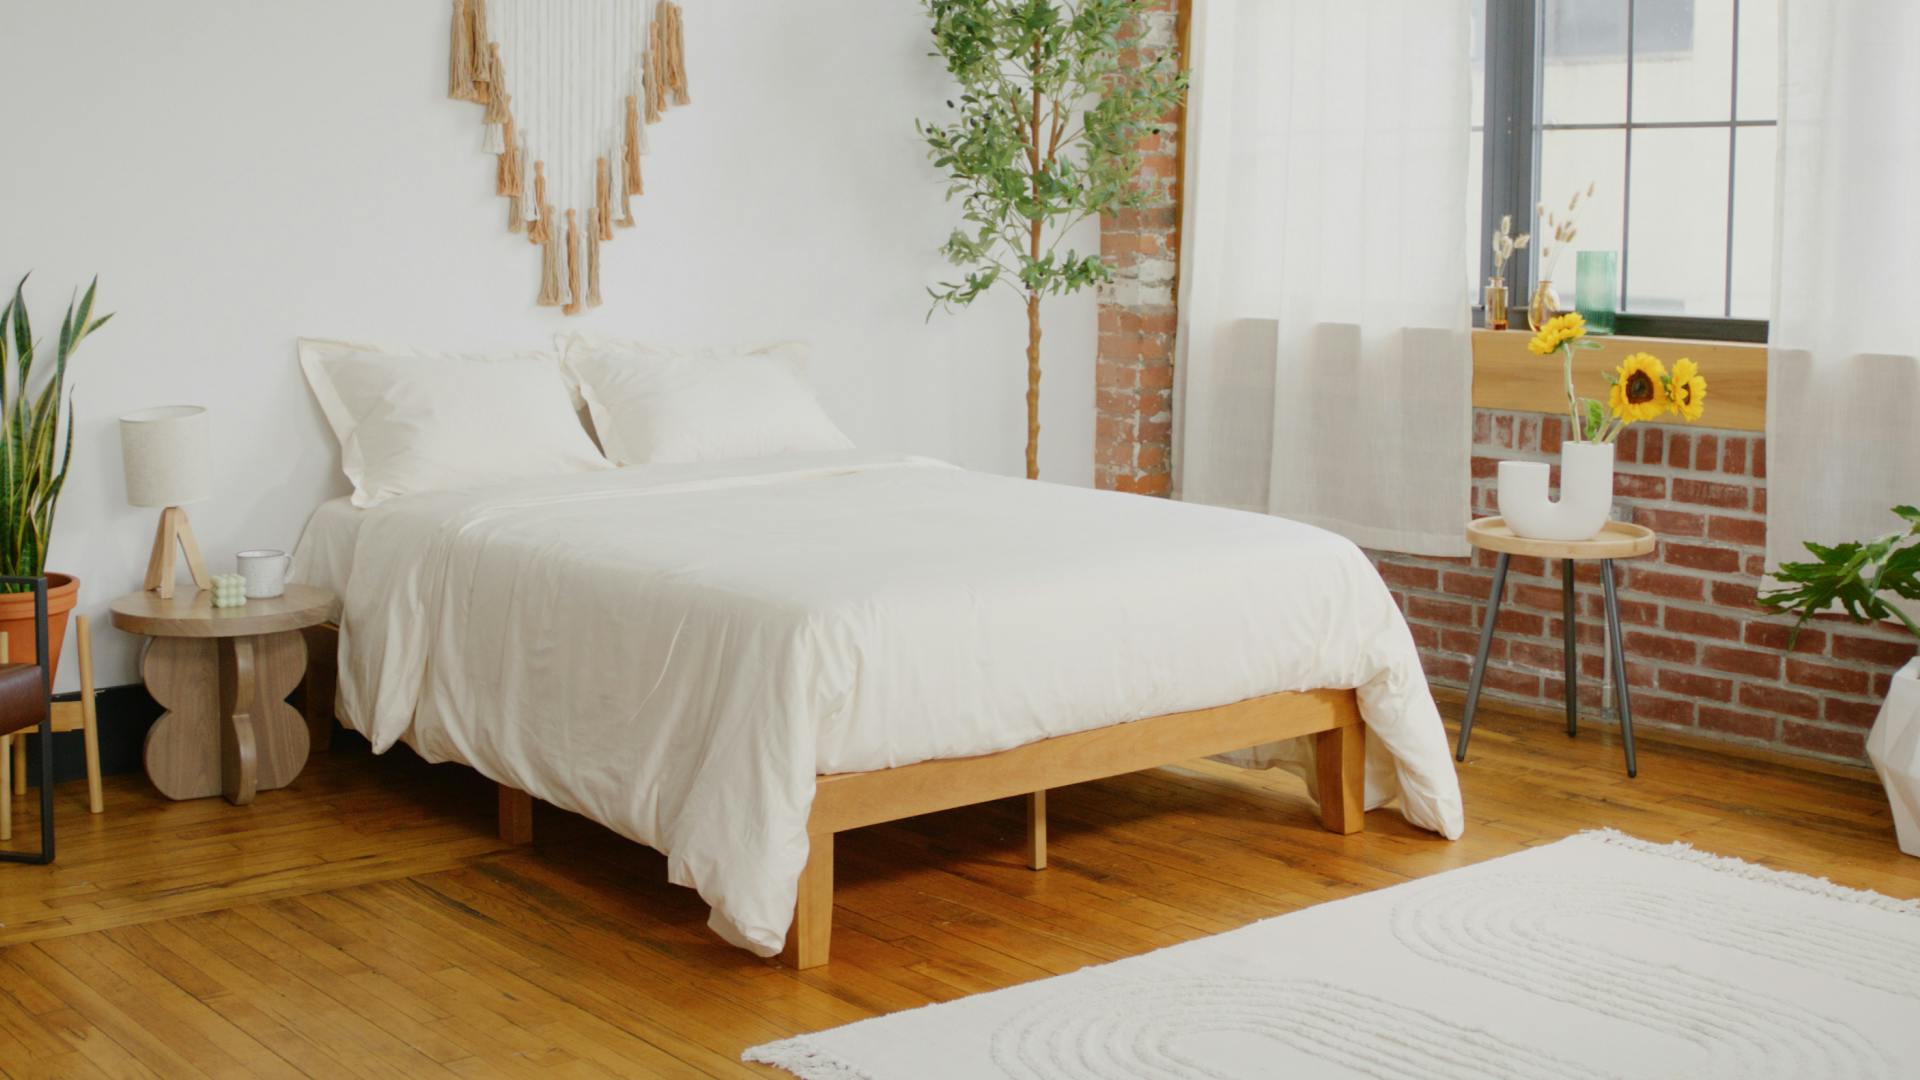 A bedroom with wooden floors and a large bed with all white bedding on a wooden frame.